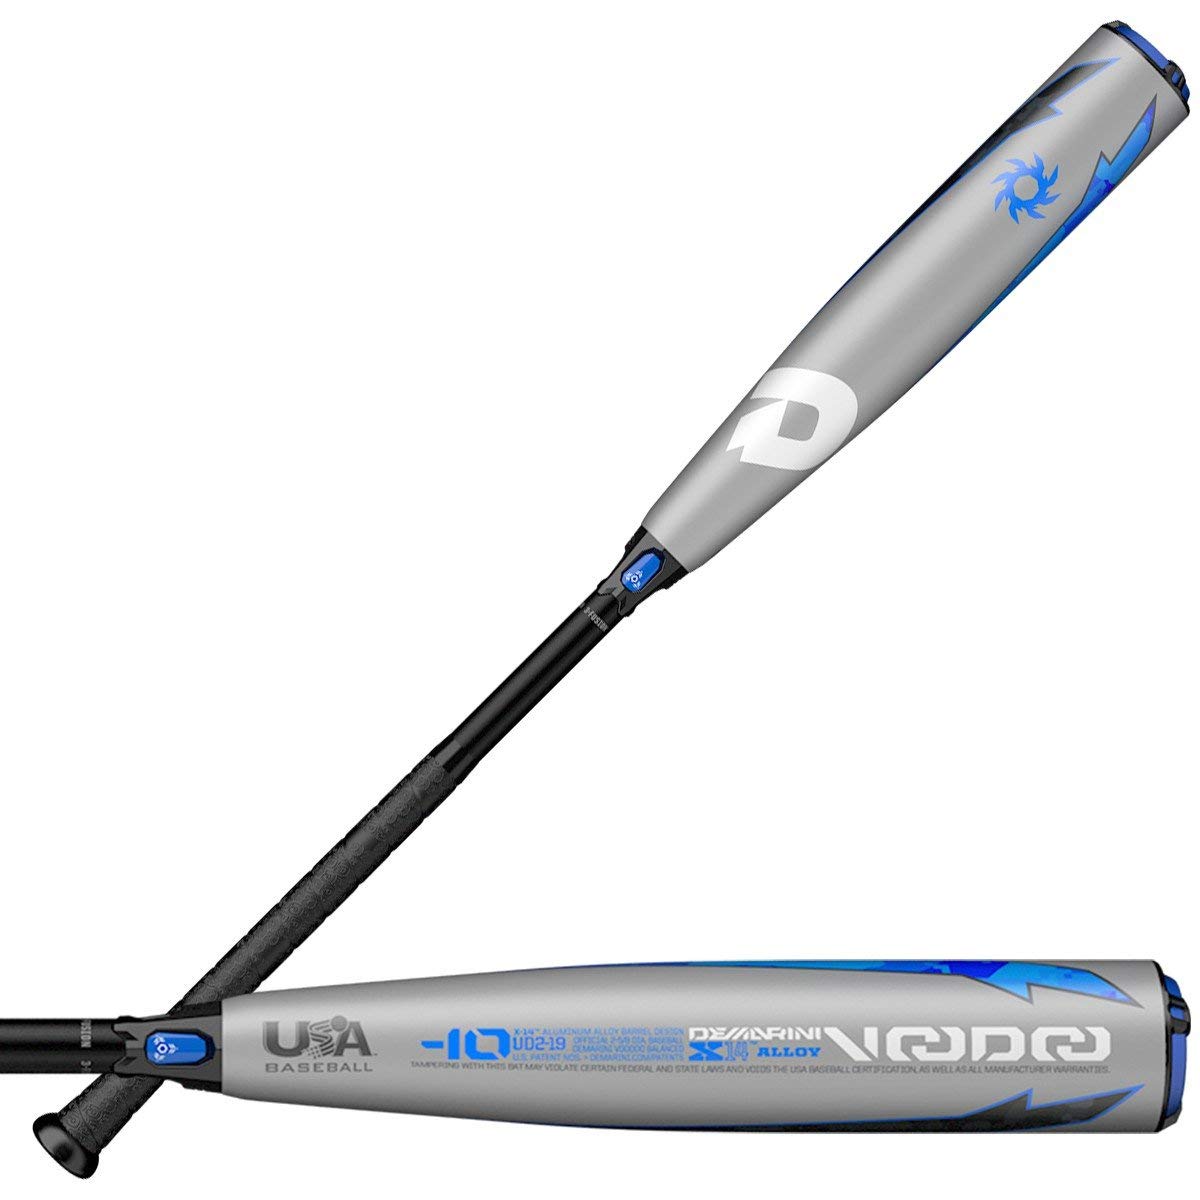 `-10 Length to Weight Ratio Balanced Swing Weight Paraflex Plus Composite Handle / X14 Alloy Barrel Approved for play in USA Baseball 1 Year Manufacturer's Warranty Designed for more physically advanced junior high aged players, the 2019 DeMarini Voodoo Balanced (-10) 2 5/8 USA Baseball bat is turning heads yet again with its improved feel and insane pop on contact. This Half and Half stick features the all-new Paraflex Plus composite handle for a lighter swing and premium feel, and is combined with an X14 Alloy barrel to create devastating power. With the 3Fusion System that redirects energy back into the barrel to reduce hand sting, elite players will love the power this bat generates. Comes with a 1 year manufacturer's warranty from DeMarini. - -10 length to weight ratio - 2 5/8 inch barrel diameter - Balanced Swing Weight - Paraflex Plus Composite Handle - X14 Alloy Barrel - 3Fusion End Cap - 3Fusion Taper - Approved for play in USA Baseball - 1 Year Manufacturer's Warranty